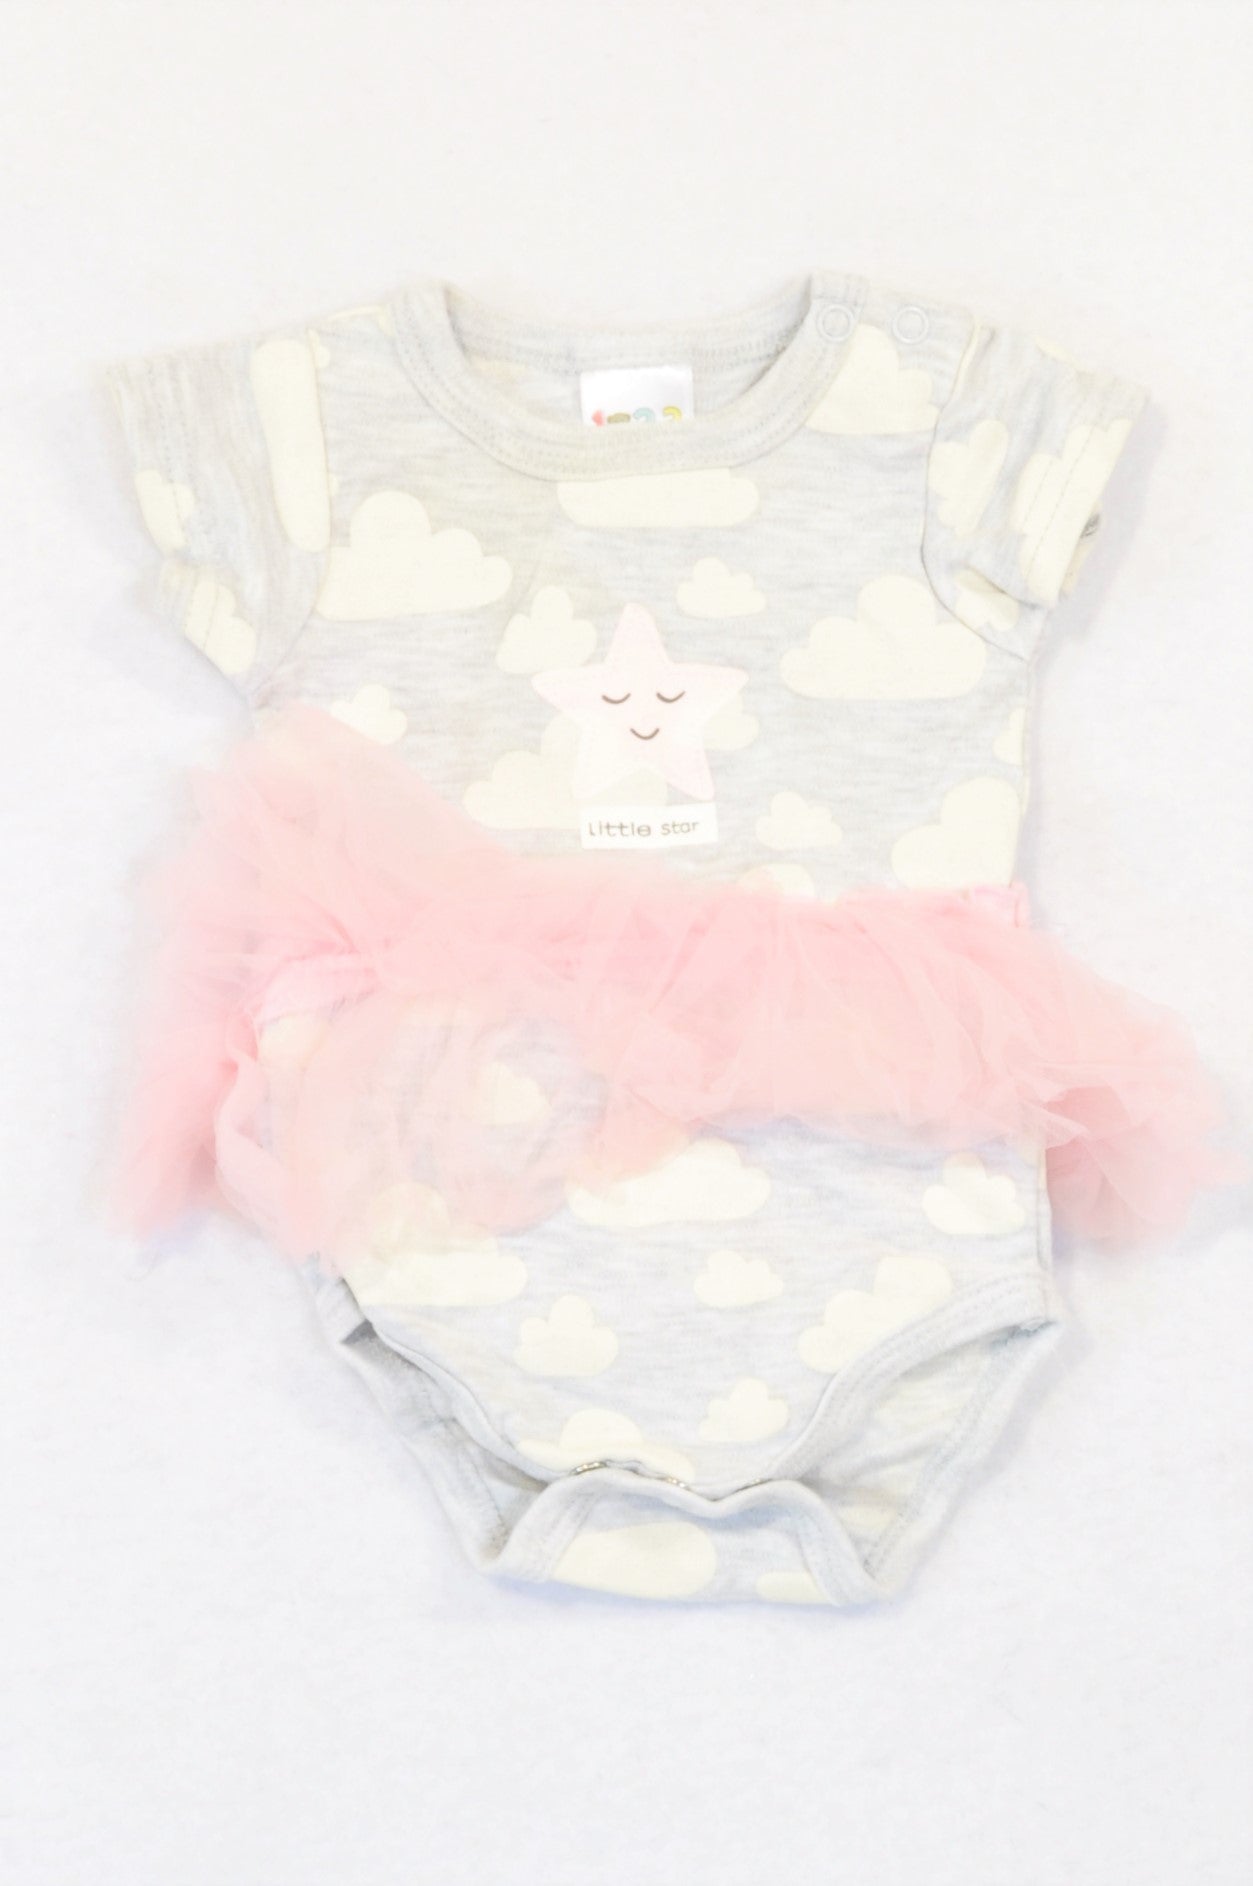 edgars baby girl clothes